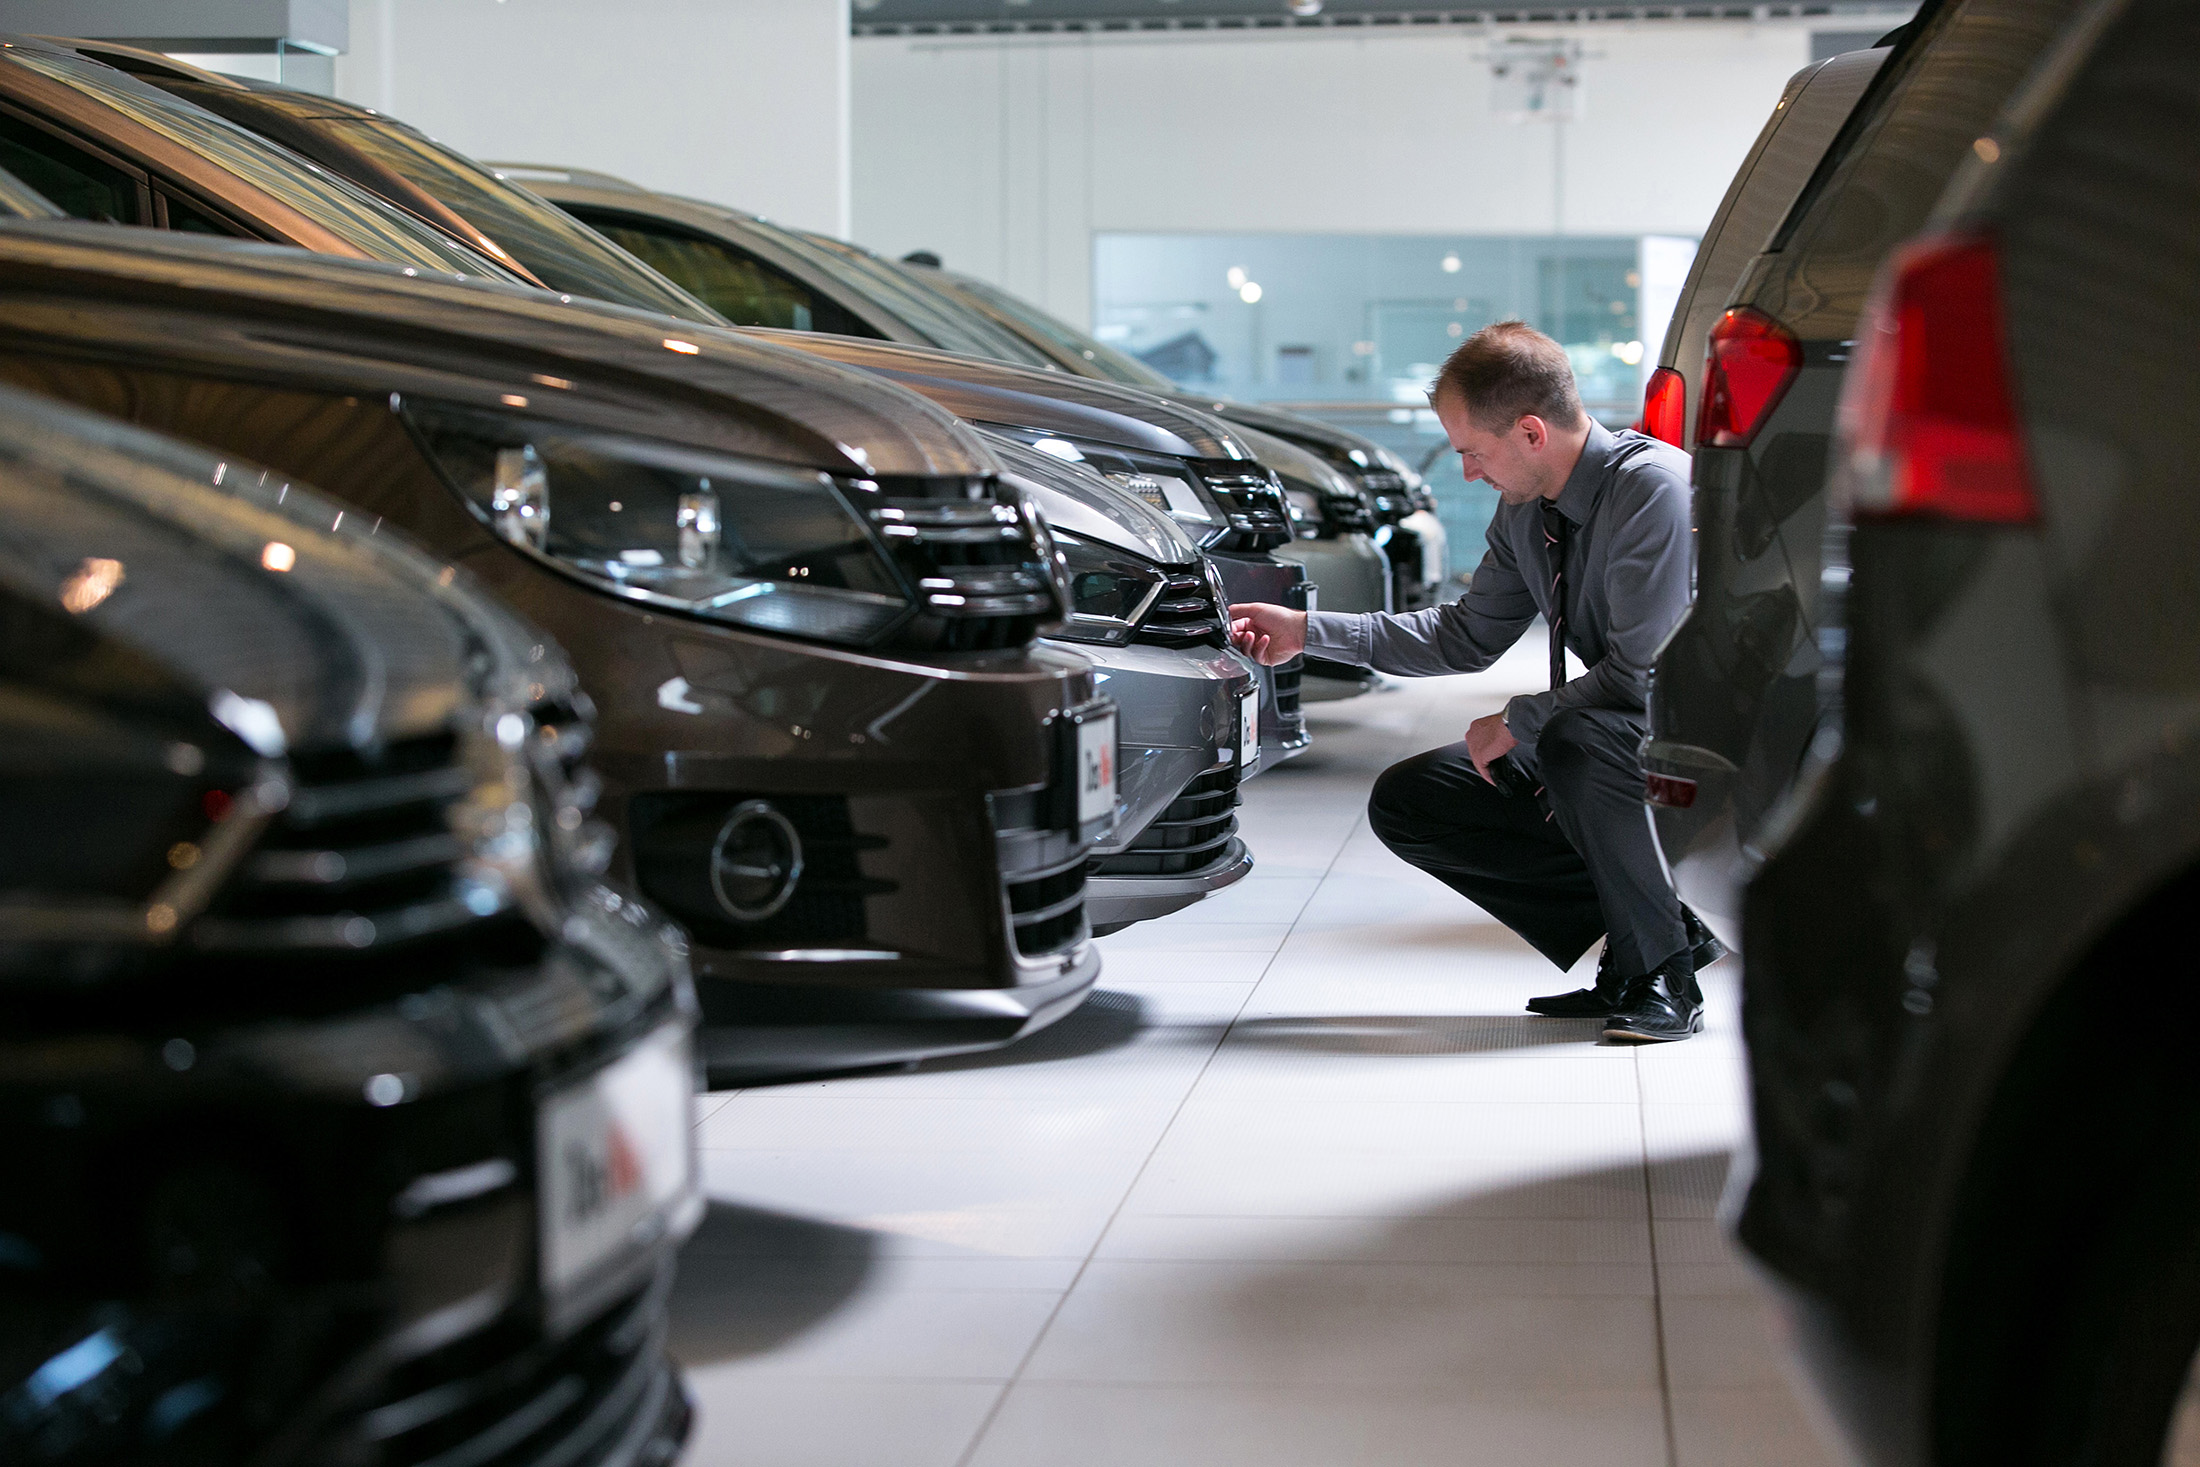 An employee inspects a Volkswagen automobile at a Volkswagen AG showroom in Berlin, Germany.
